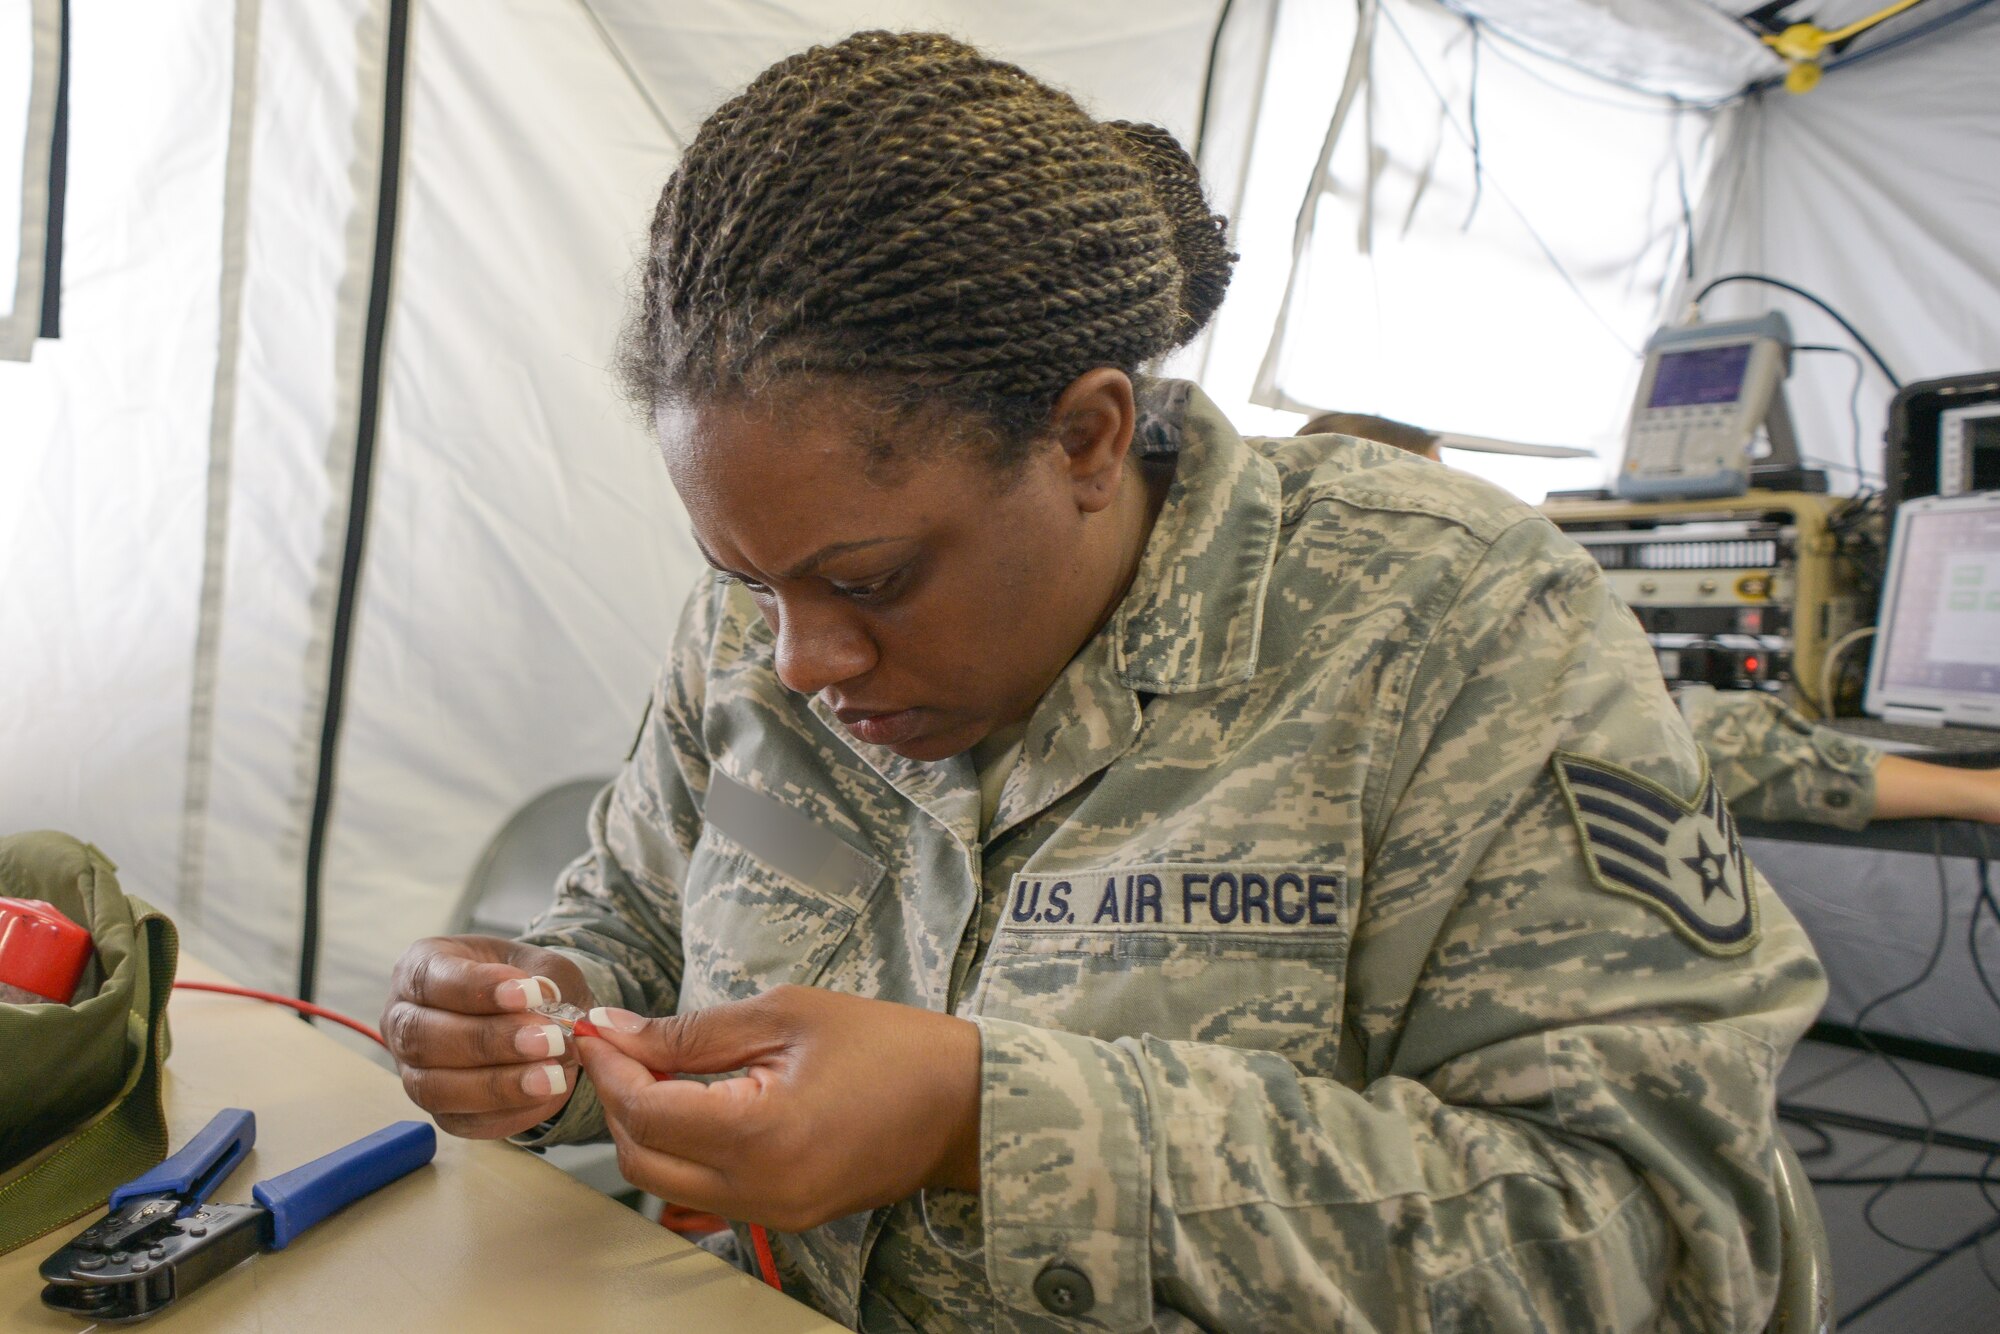 A client systems journeyman with the 283rd Combat Communications Squadron (CCS) from Dobbins Air Reserve Base, Georgia Air National Guard, terminates the end of a Cat-5 cable for a Theater Deployable Communications System during the Sentry Savannah 15-2 exercise at The Air Dominance Center, Savannah, Ga., May 8, 2015. Sentry Savannah is a National Guard Bureau sponsored training event with a focus on Joint Dissimilar Air Combat Training and 5th Generation Fighter Integration. It offers a chance for fighter pilots to participate in war simulations that depict what they would face in real-world scenarios. During the exercise the 283rd CBCS provided NIPR, SIPR, and voice services to the 117th Air Control Squadron Air Battle Element and extended service to their deployed radar site. Working together the two units provided vital data to help the fighter pilots complete their missions. (U.S. Air National Guard photo by the 116th Air Control Wing Public Affairs/Released) (Name of military member has been blurred and withheld for security purposes)